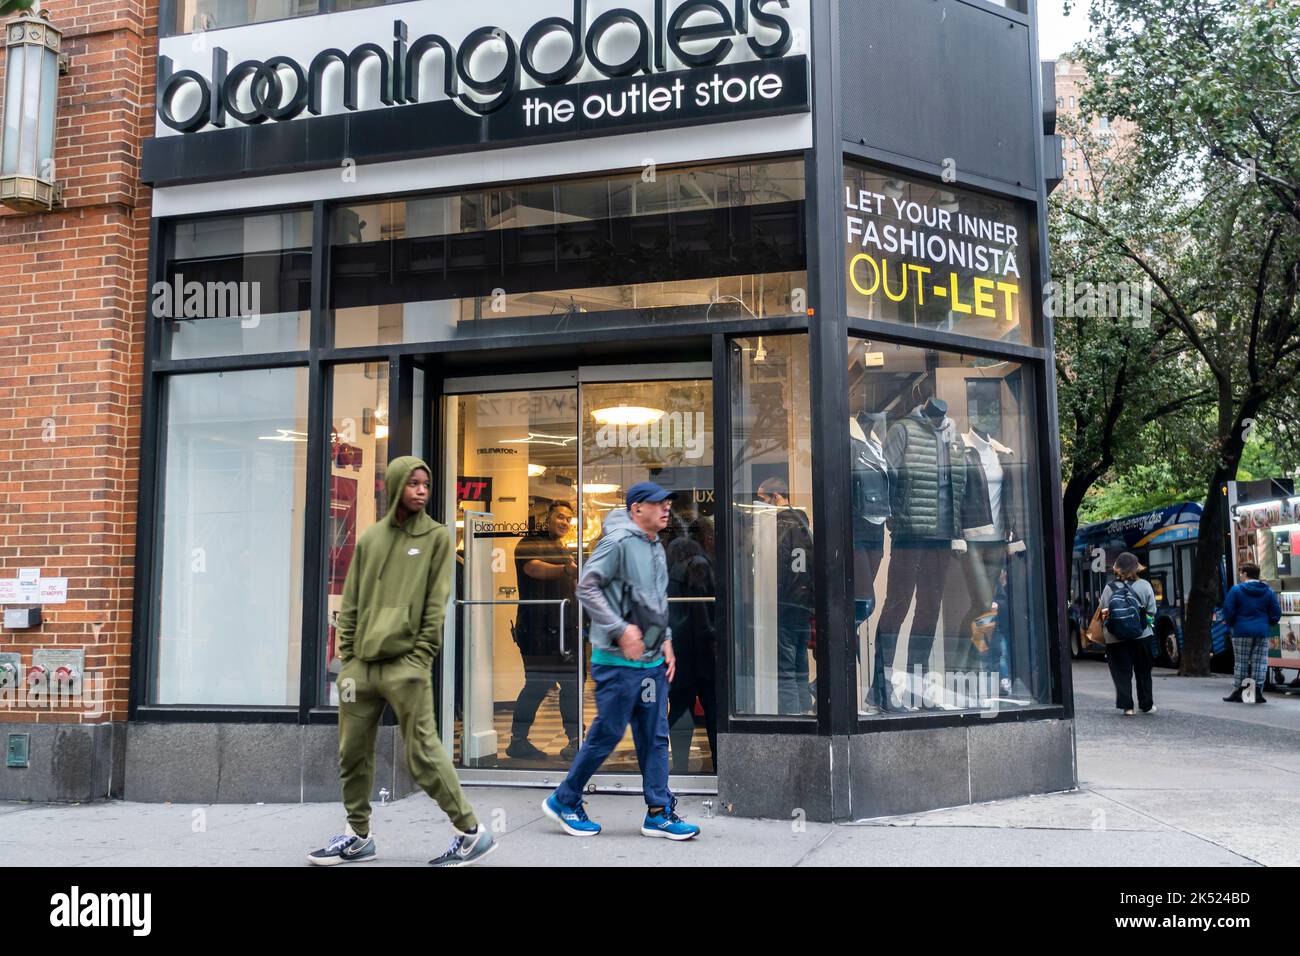 Bloomingdale's The Outlet Store in the Upper West Side neighborhood of New York on Saturday, October 1, 2022.  The store sells discounted merchandise to better compete with off-price retailers such as TJ Maxx. (© Richard B. Levine) Stock Photo